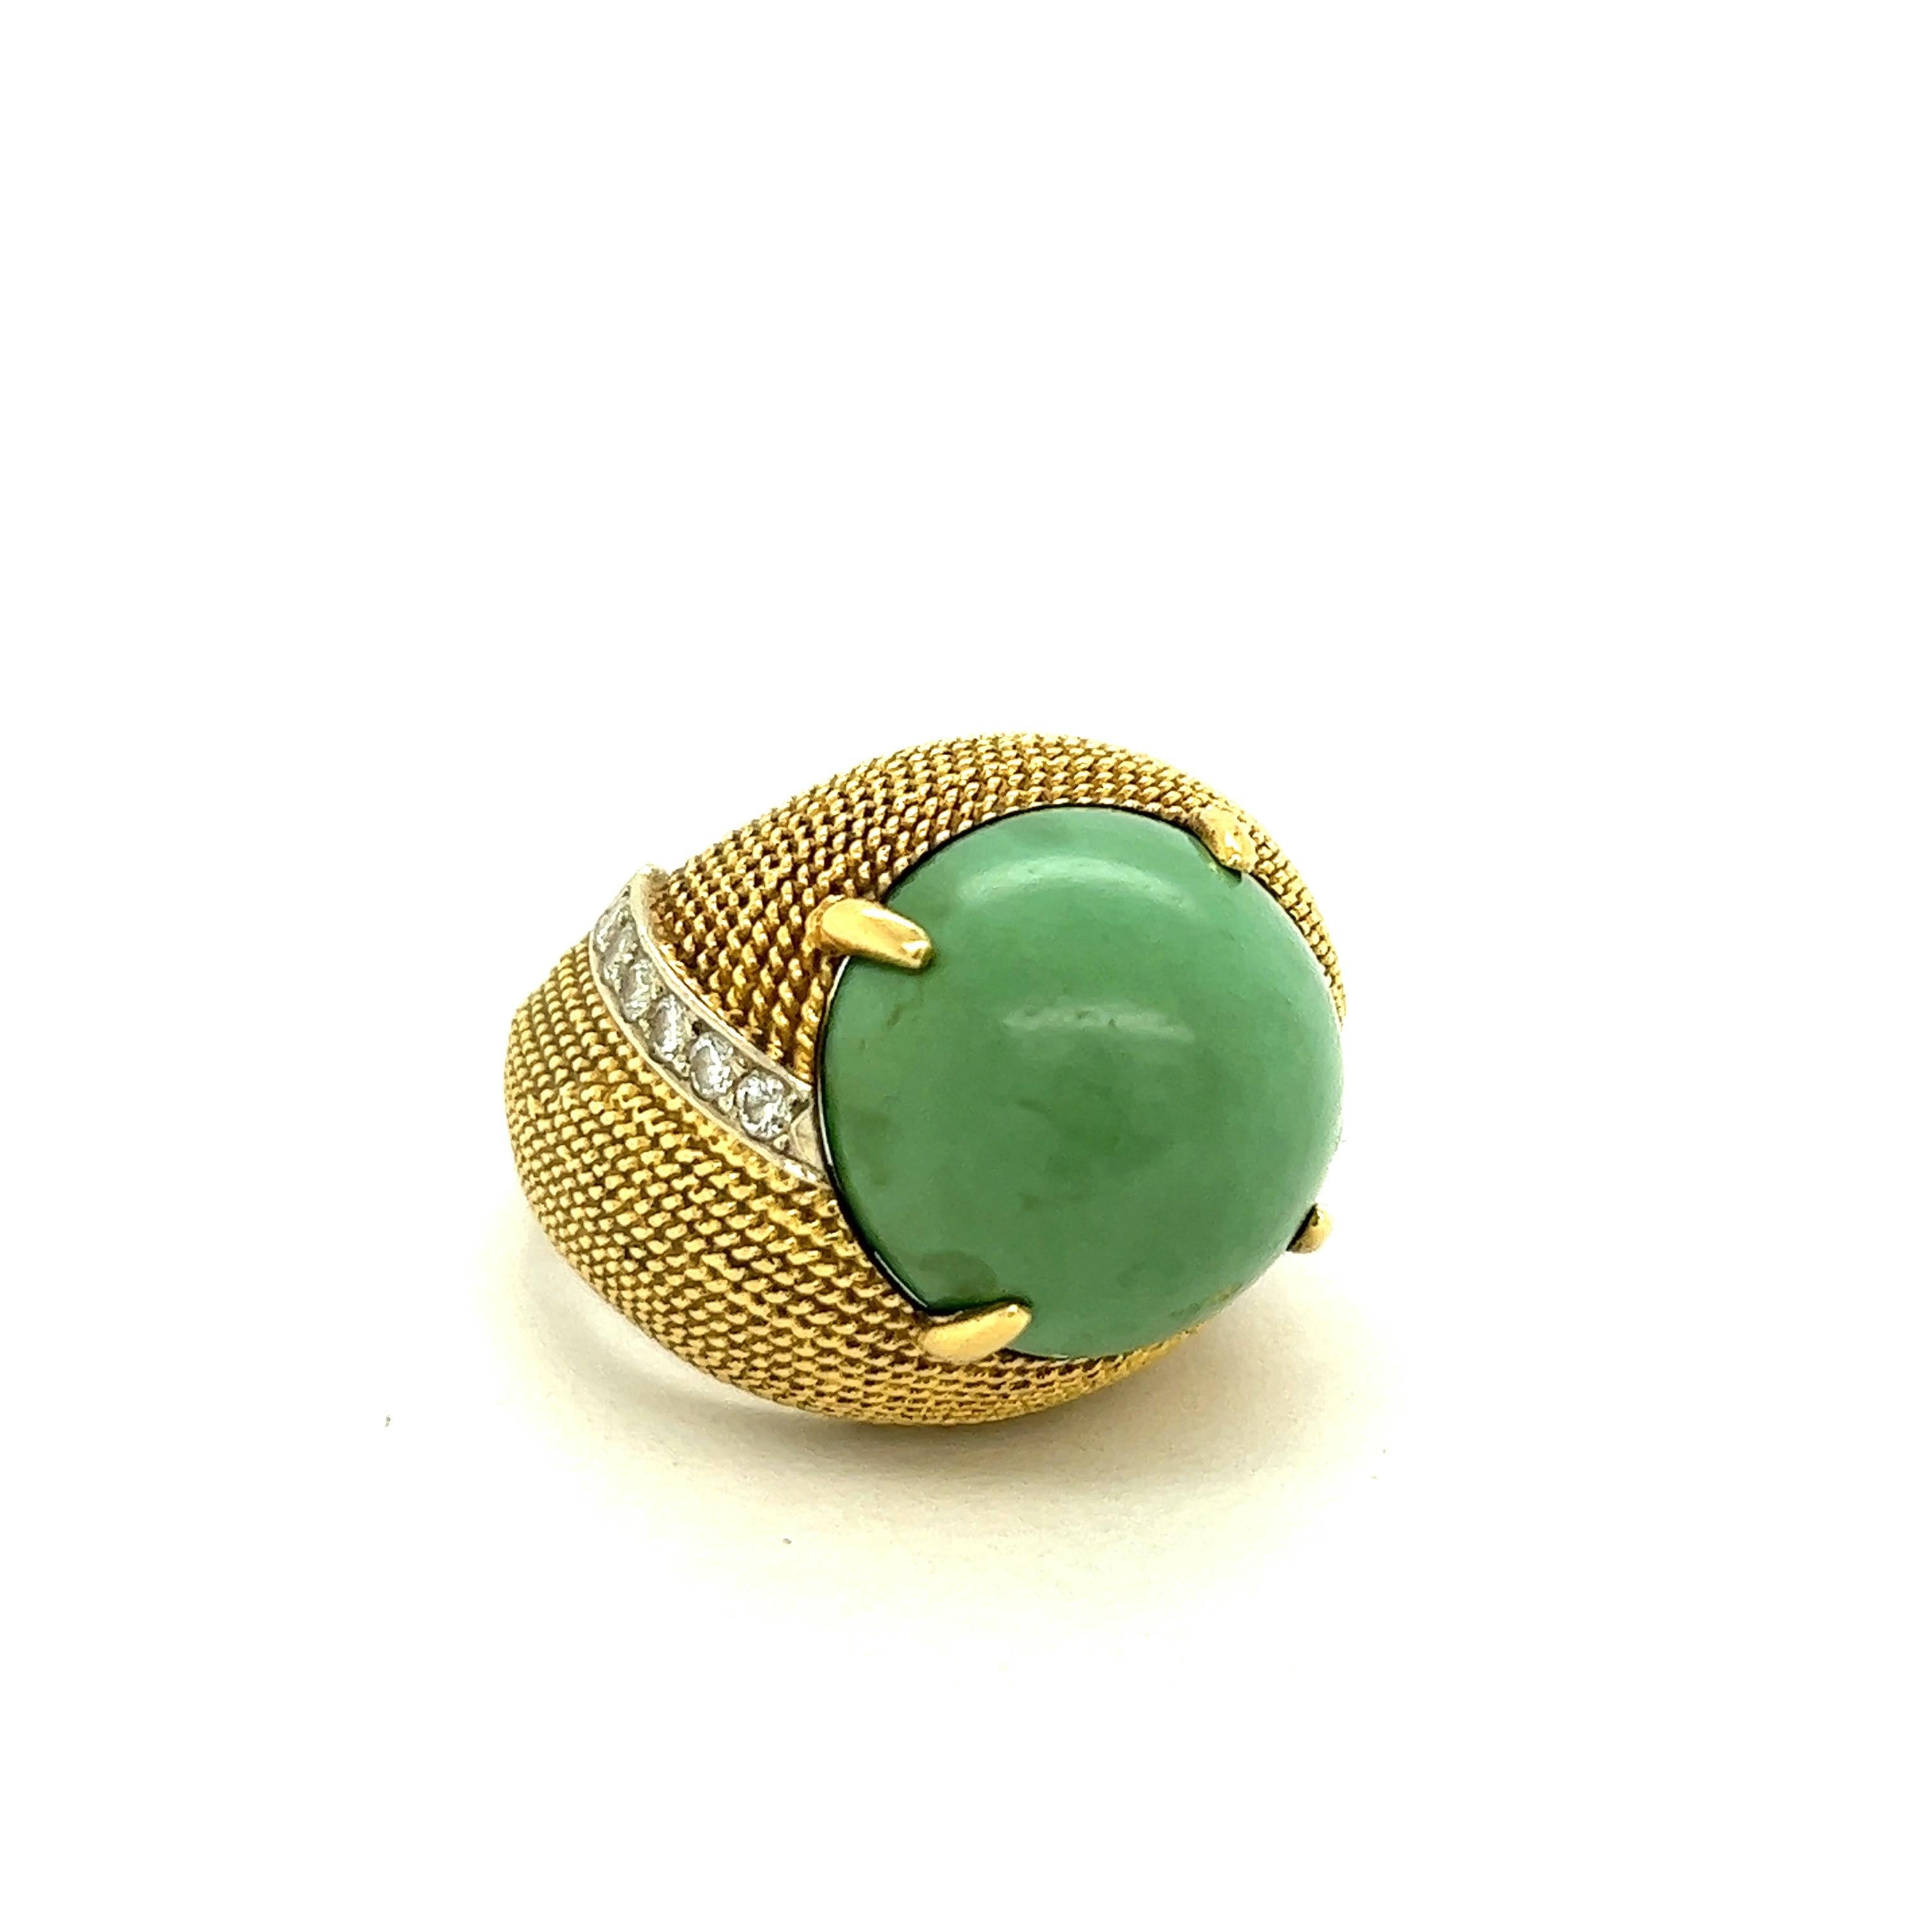 Cabochon Green Turquoise 18k Yellow Gold Cocktail Ring

Large cabochon shape green turquoise (15 x 15 mm), set on 18 karat yellow gold with twisted rope motif; marked 18k

Ring's top width 19.3 mm, length 23.7 mm

Size: 6.75 US 
Total weight: 15.5